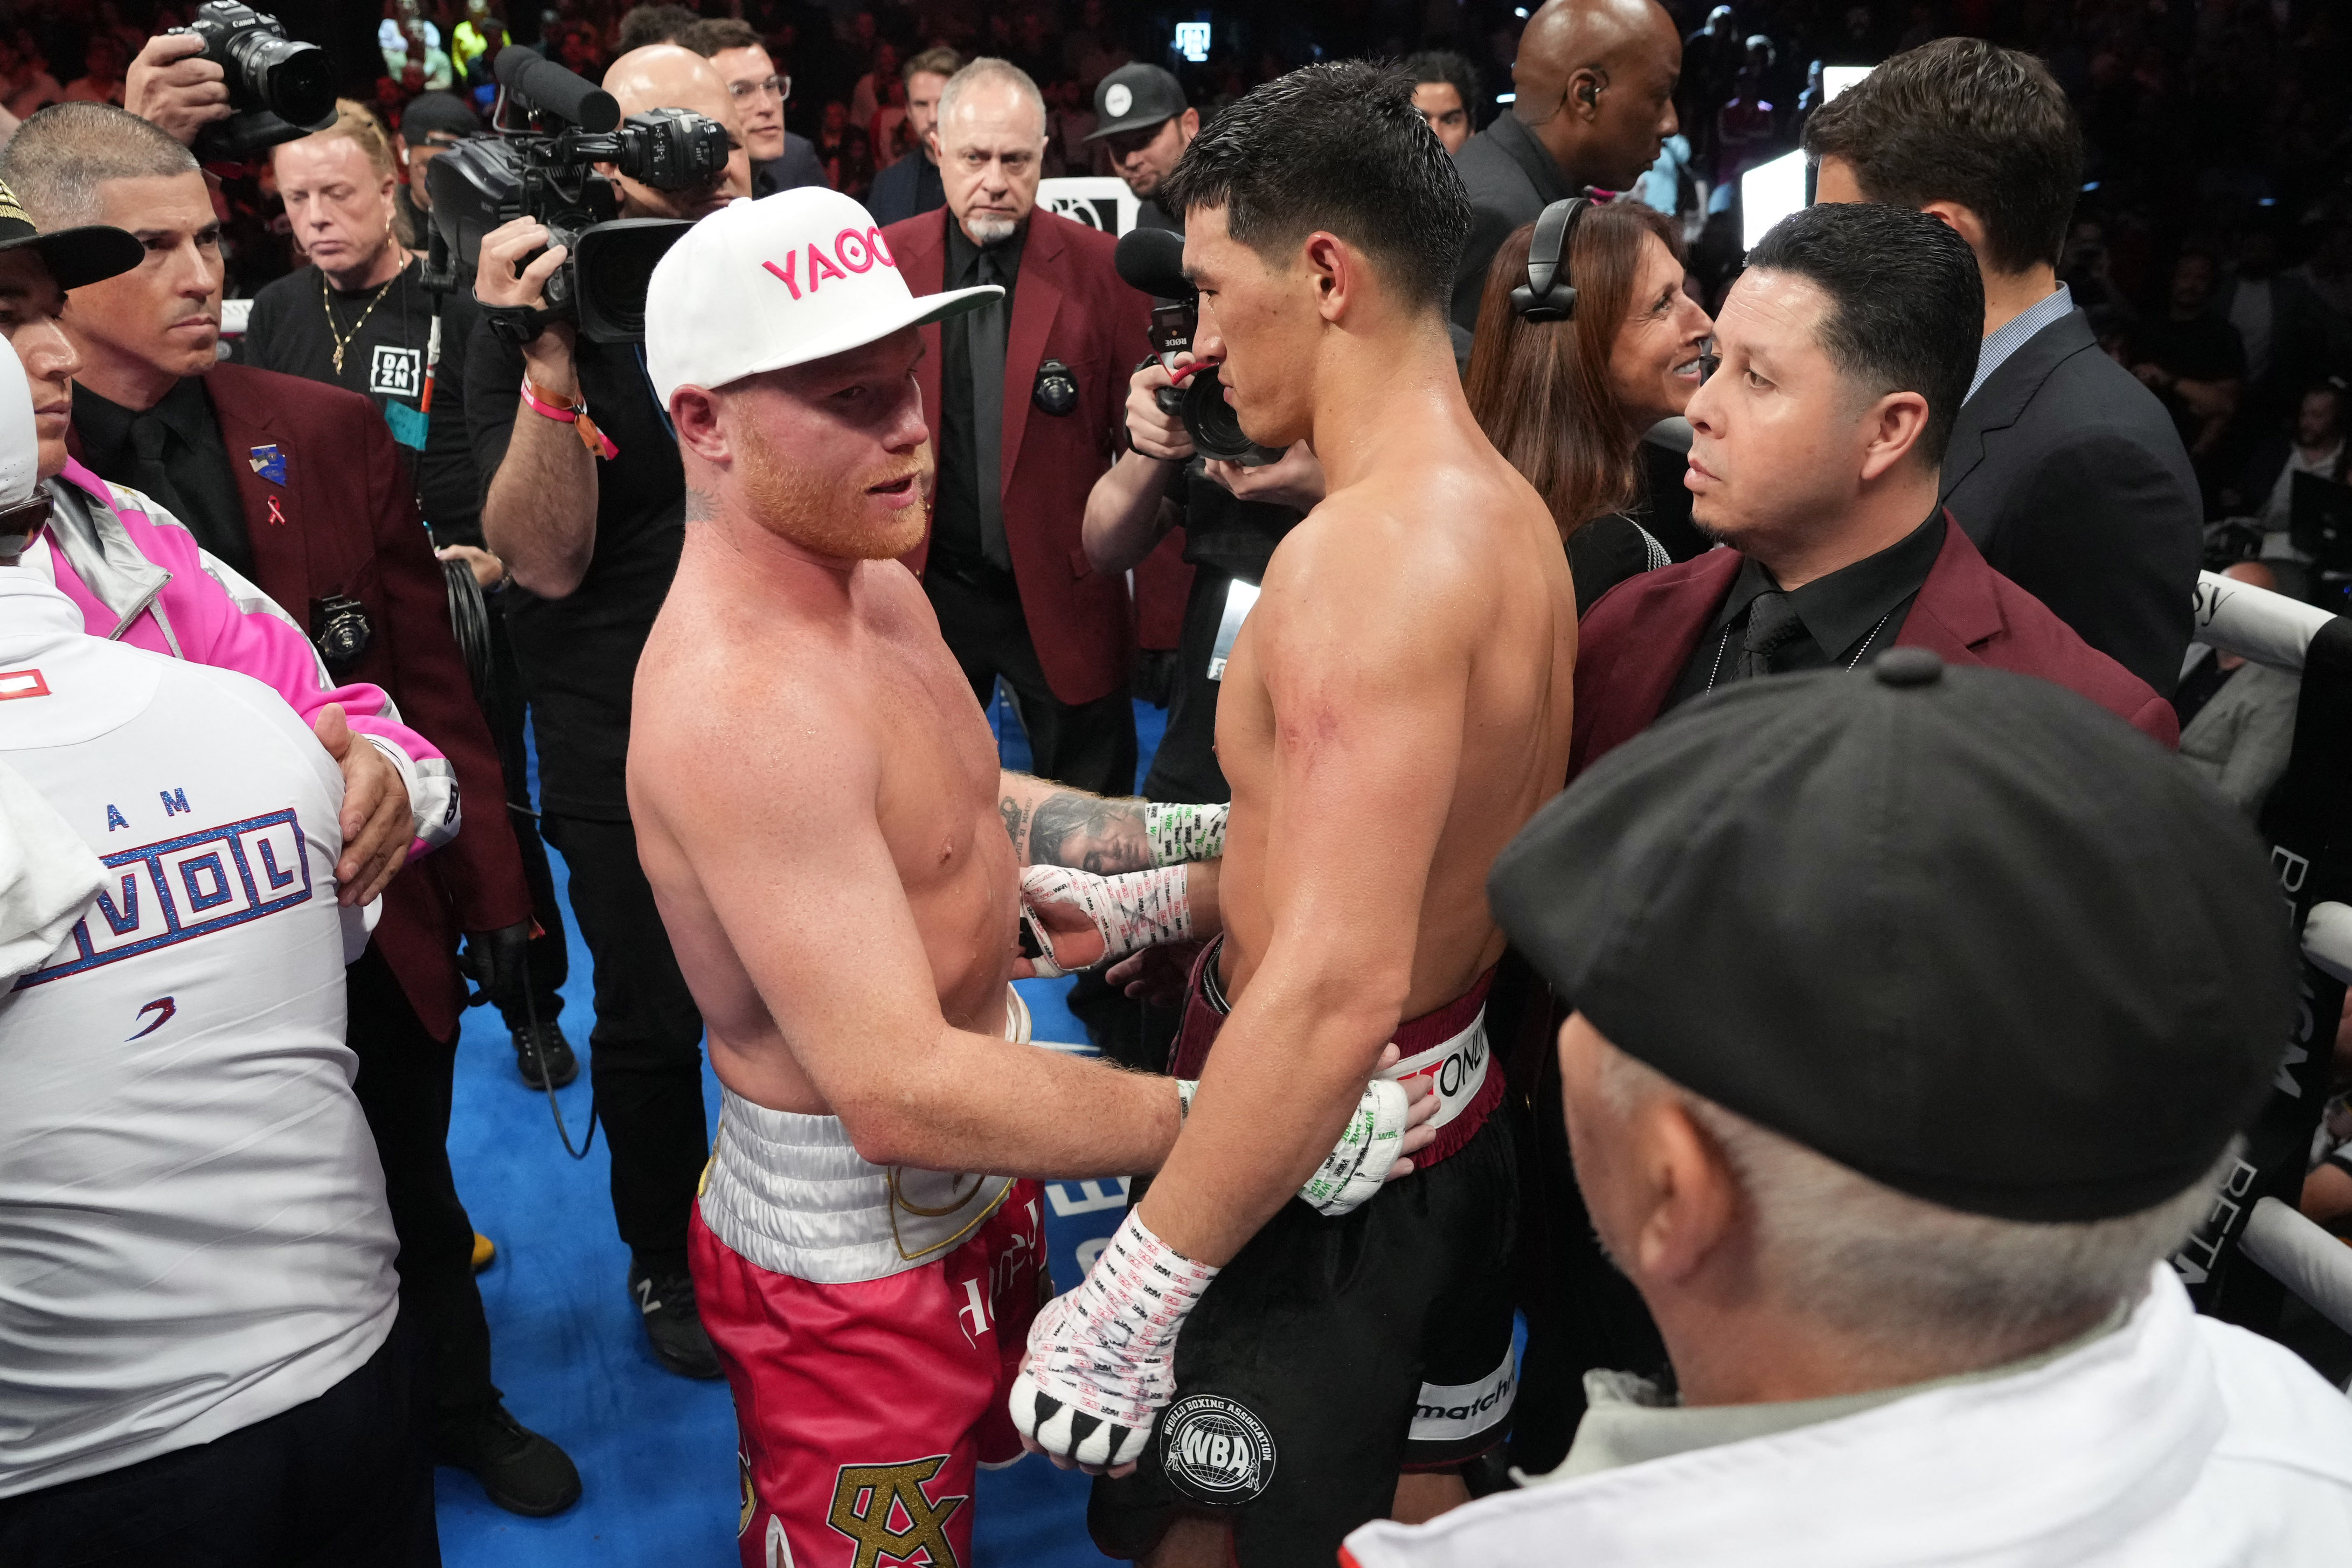 May 7, 2022; Las Vegas, Nevada, USA; Canelo Alvarez (pink trunks) and Dimitry Bivol (black trunks) embrace after their light heavyweight championship bout at T-Mobile Arena. Mandatory Credit: Joe Camporeale-USA TODAY Sports